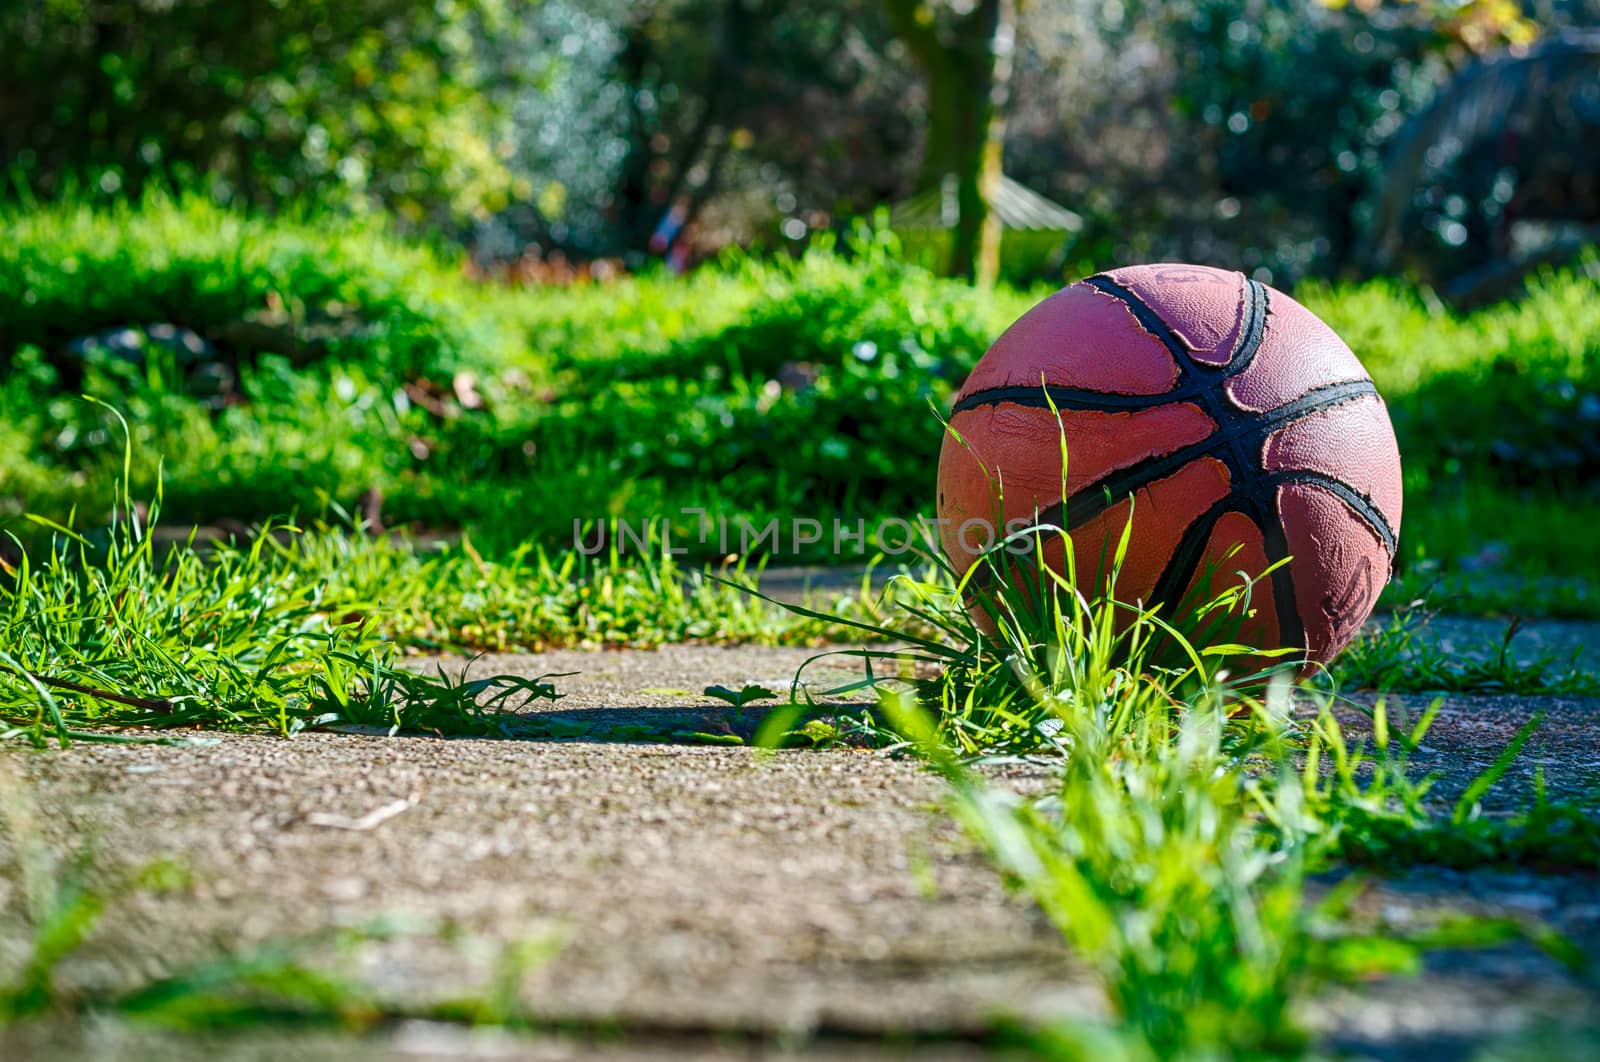 Used basketball in country playground in a sunny morning